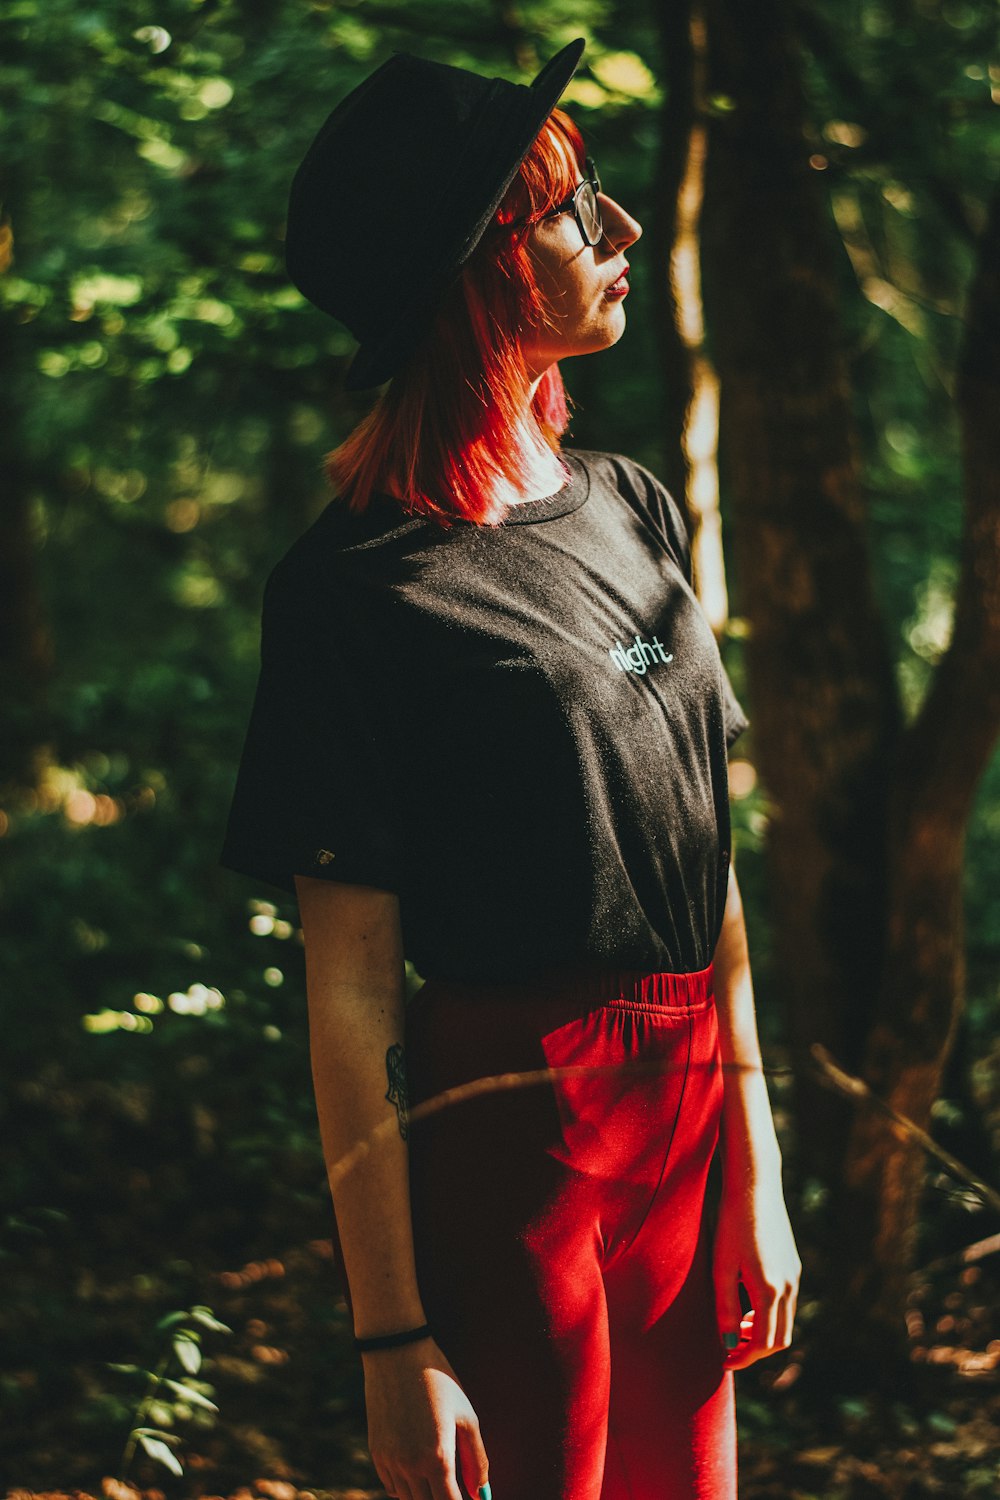 woman in black crew neck t-shirt and red skirt standing near green trees during daytime